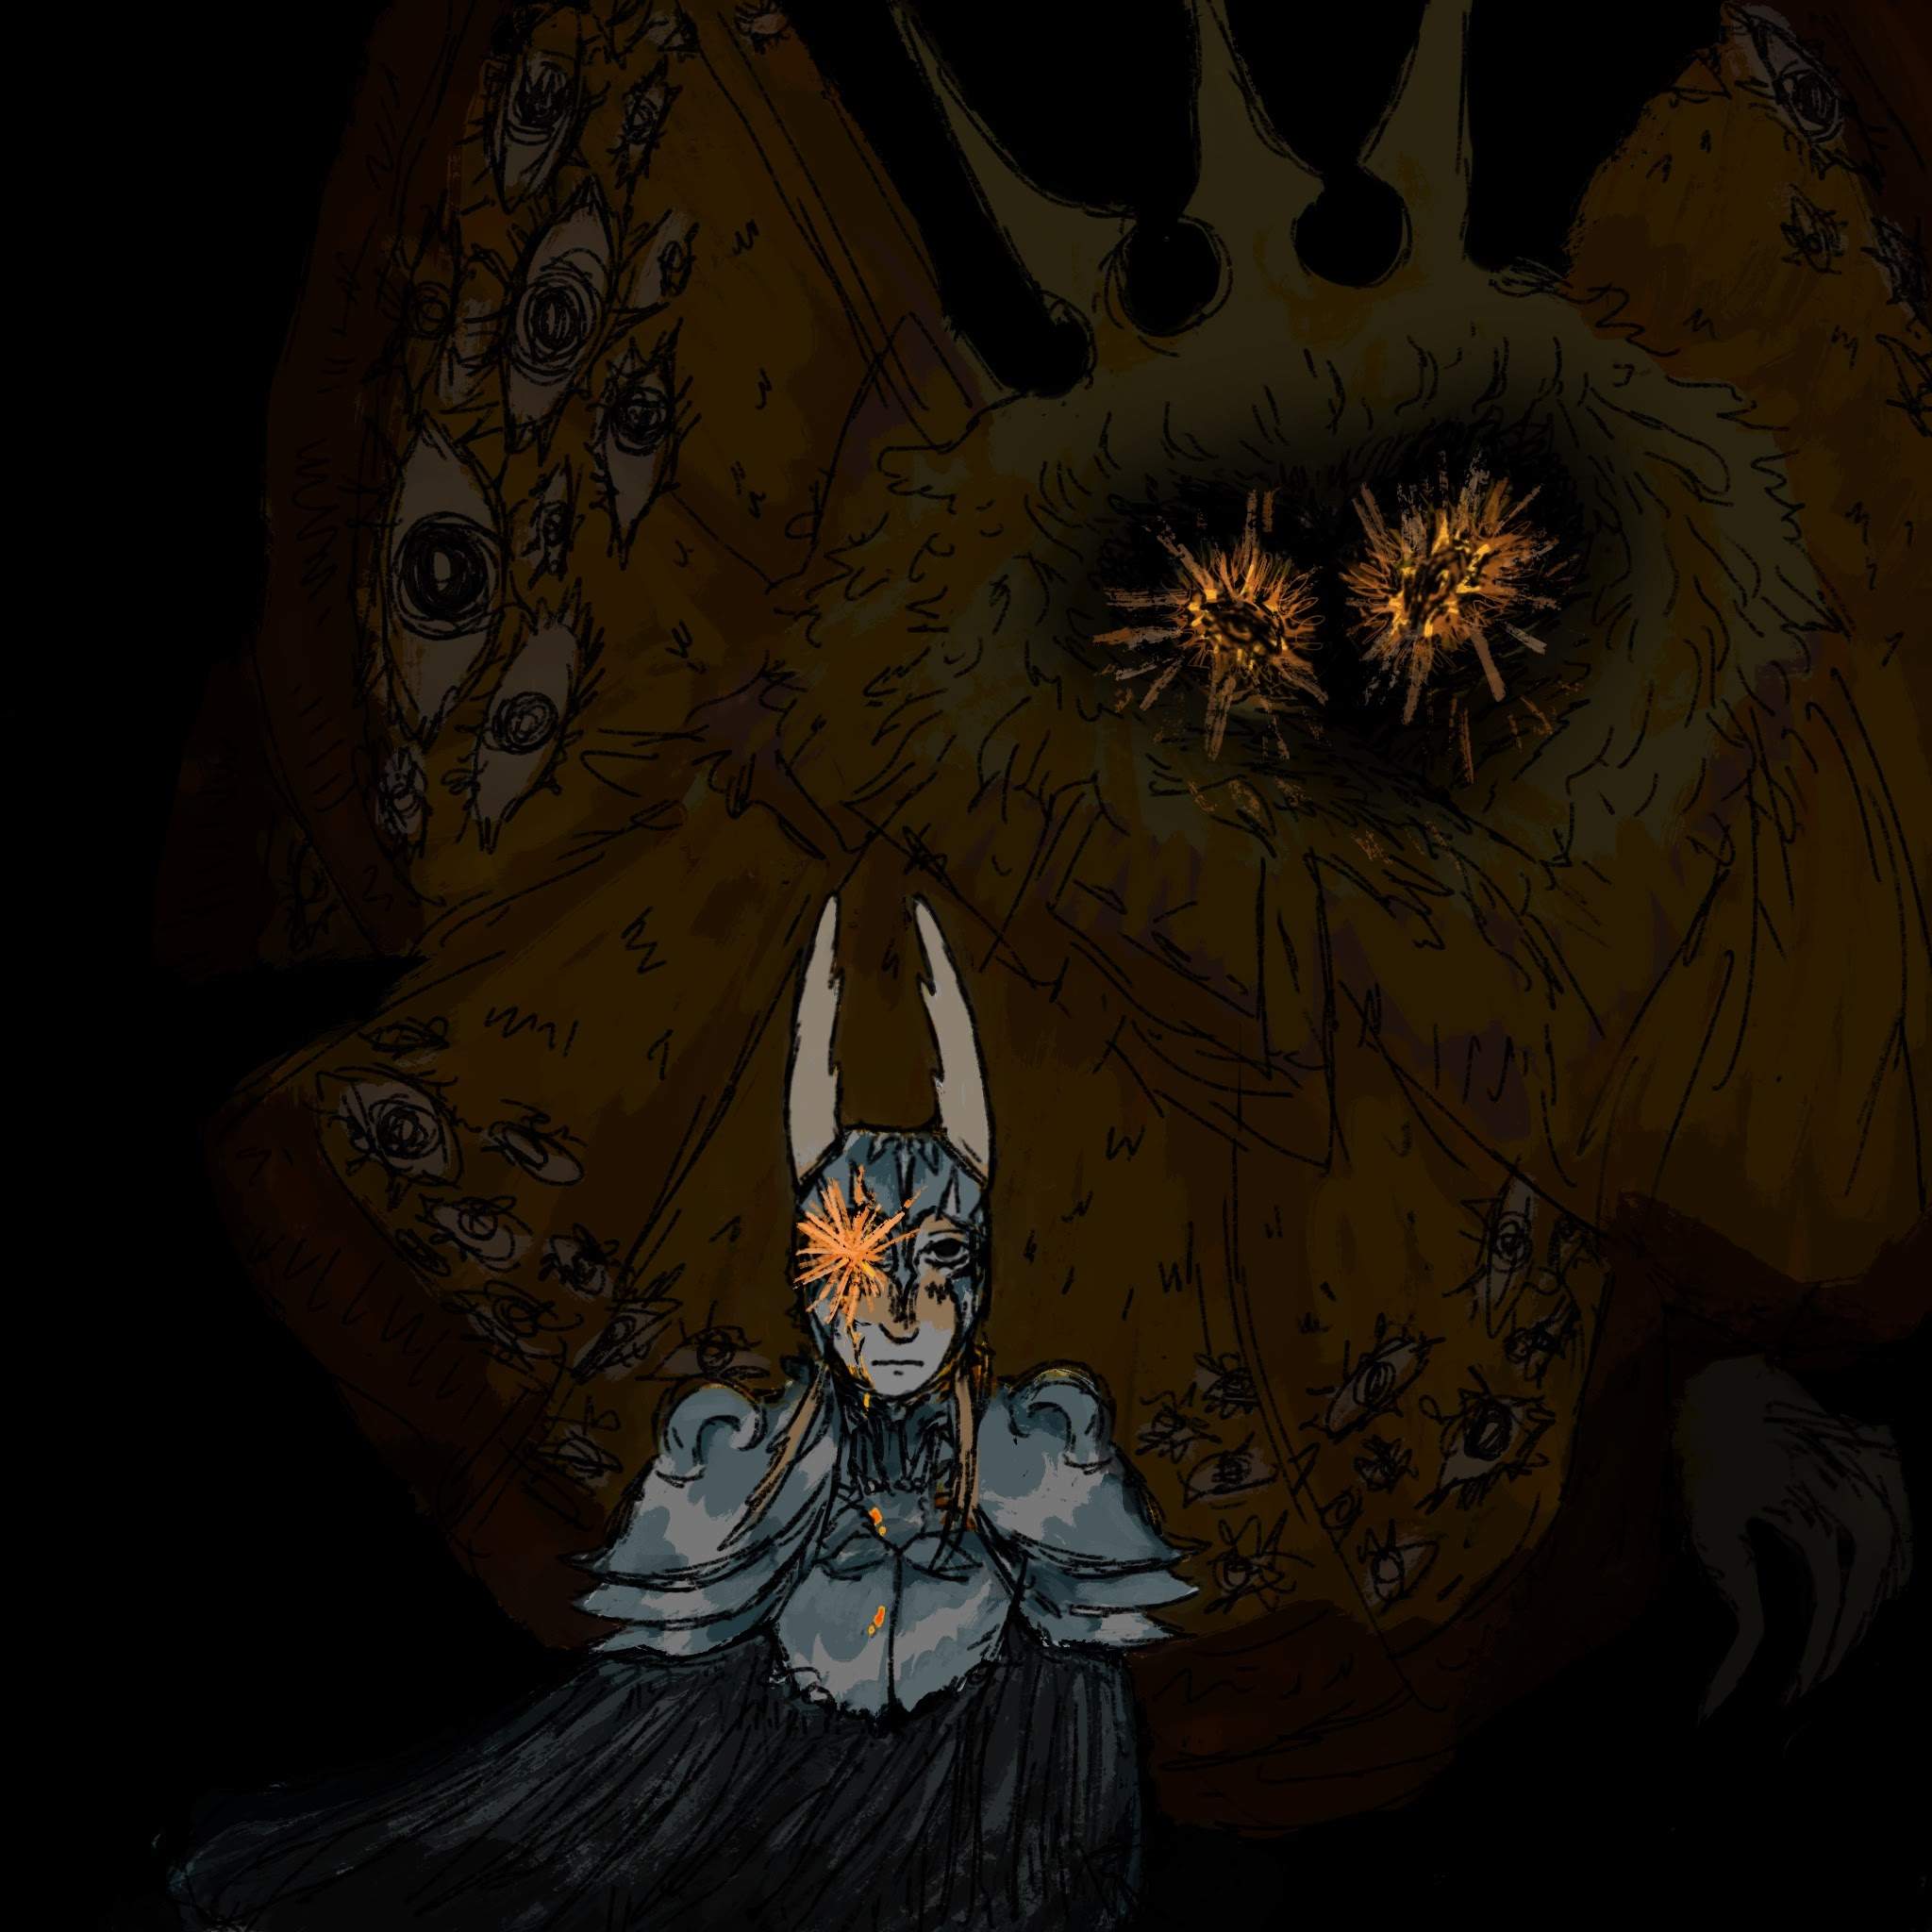 A dark portrait of a humanoid version of The Radiance and The Hollow Knight.

The Hollow Knight is standing solemnly, looking directly at the viewer; their right eye glowing with the Radiance’s infection, unable to be contained. A few drops of the infection drip down their face onto their cuirass, which is adorned with a stylized insignia of the Pale King. Upon their shoulders is a three-layered spaulder, underneath which is a dark cloak, blowing slightly in the wind, almost entirely hidden by shadows. On their head sits a helmet, with two three-pronged horns. The helmet itself is adorned with various decorations resembling the Pale King’s crown.

Behind them is the Radiance. Though her face is covered by darkness, her human eyes are visible, glowing in a similar fashion to the Hollow Knight, as she too gazes at the viewer. Her expression is hard to place but appears to be more fierce than anything else. The rest of her body, including her crown; long hair; and moth wings, which are covered with many eyes; are also shrouded, just like her face, in darkness. Her long, manicured, right-hand is casually reaching out from the folds of her wings towards nothing in particular.